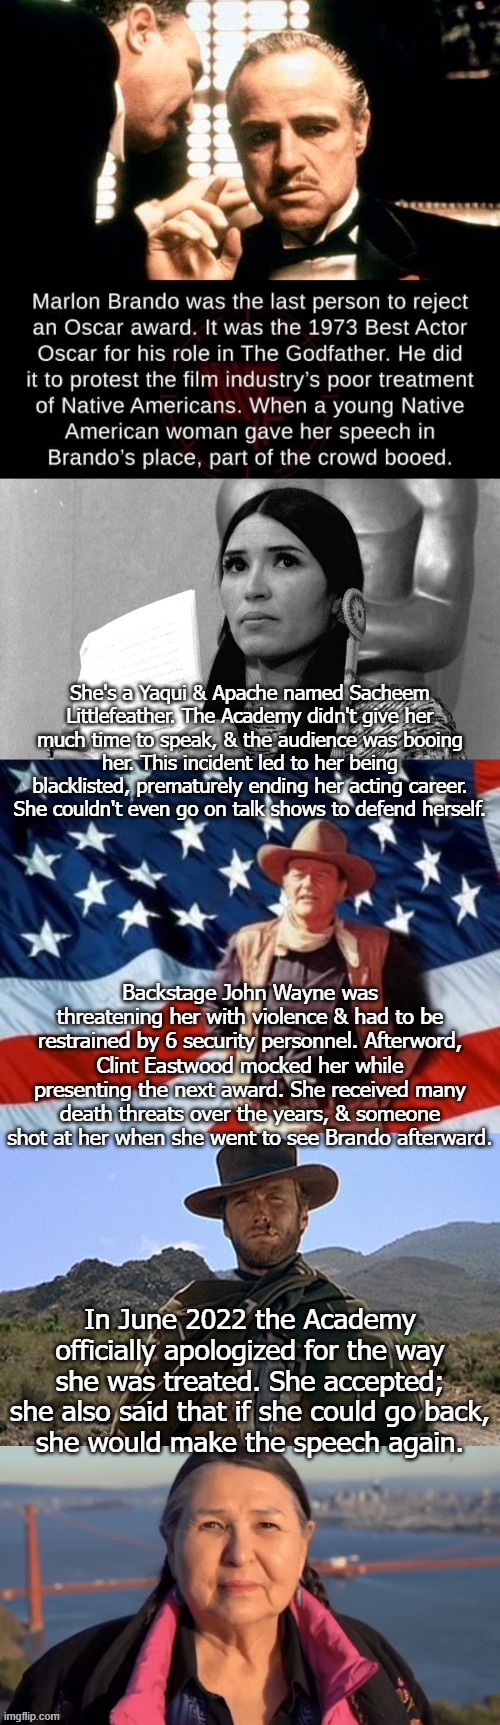 Unlike Will Smith, John Wayne was not banned from the Oscars. | image tagged in native american,scumbag hollywood,racism,stereotypes,brave | made w/ Imgflip meme maker